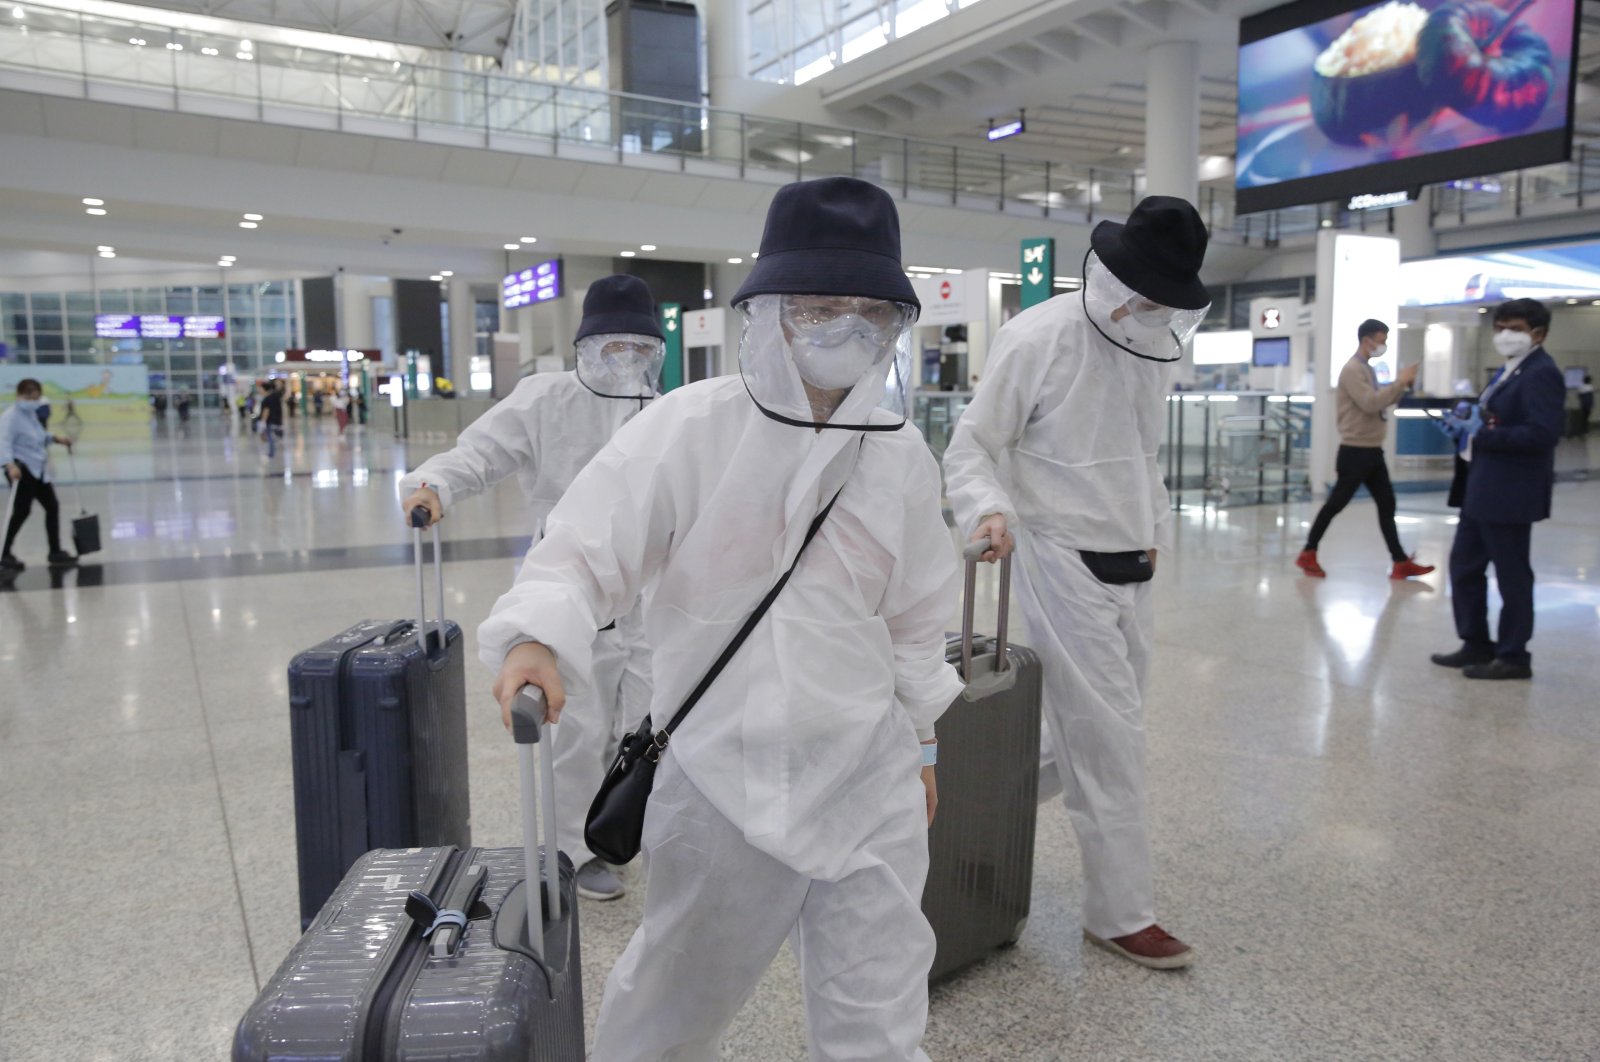 Passengers wear suits and face masks to protect against the coronavirus as they arrive at the Hong Kong airport, March 23, 2020. (AP Photo)